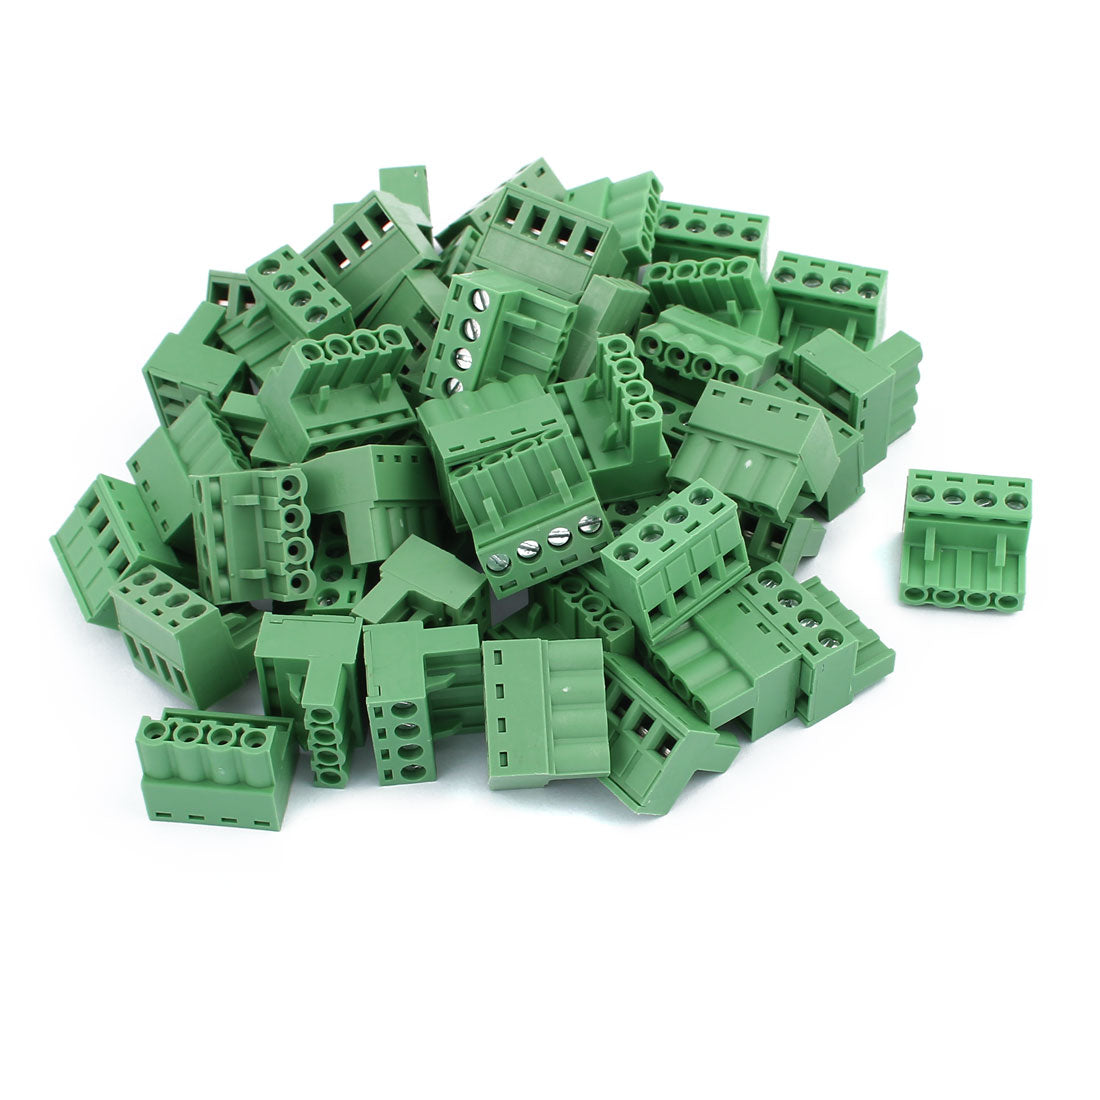 Uxcell Uxcell 50Pcs 300V KF2EDGK 5.08mm Pitch 4-Pin PCB Screw Terminal Block Connector